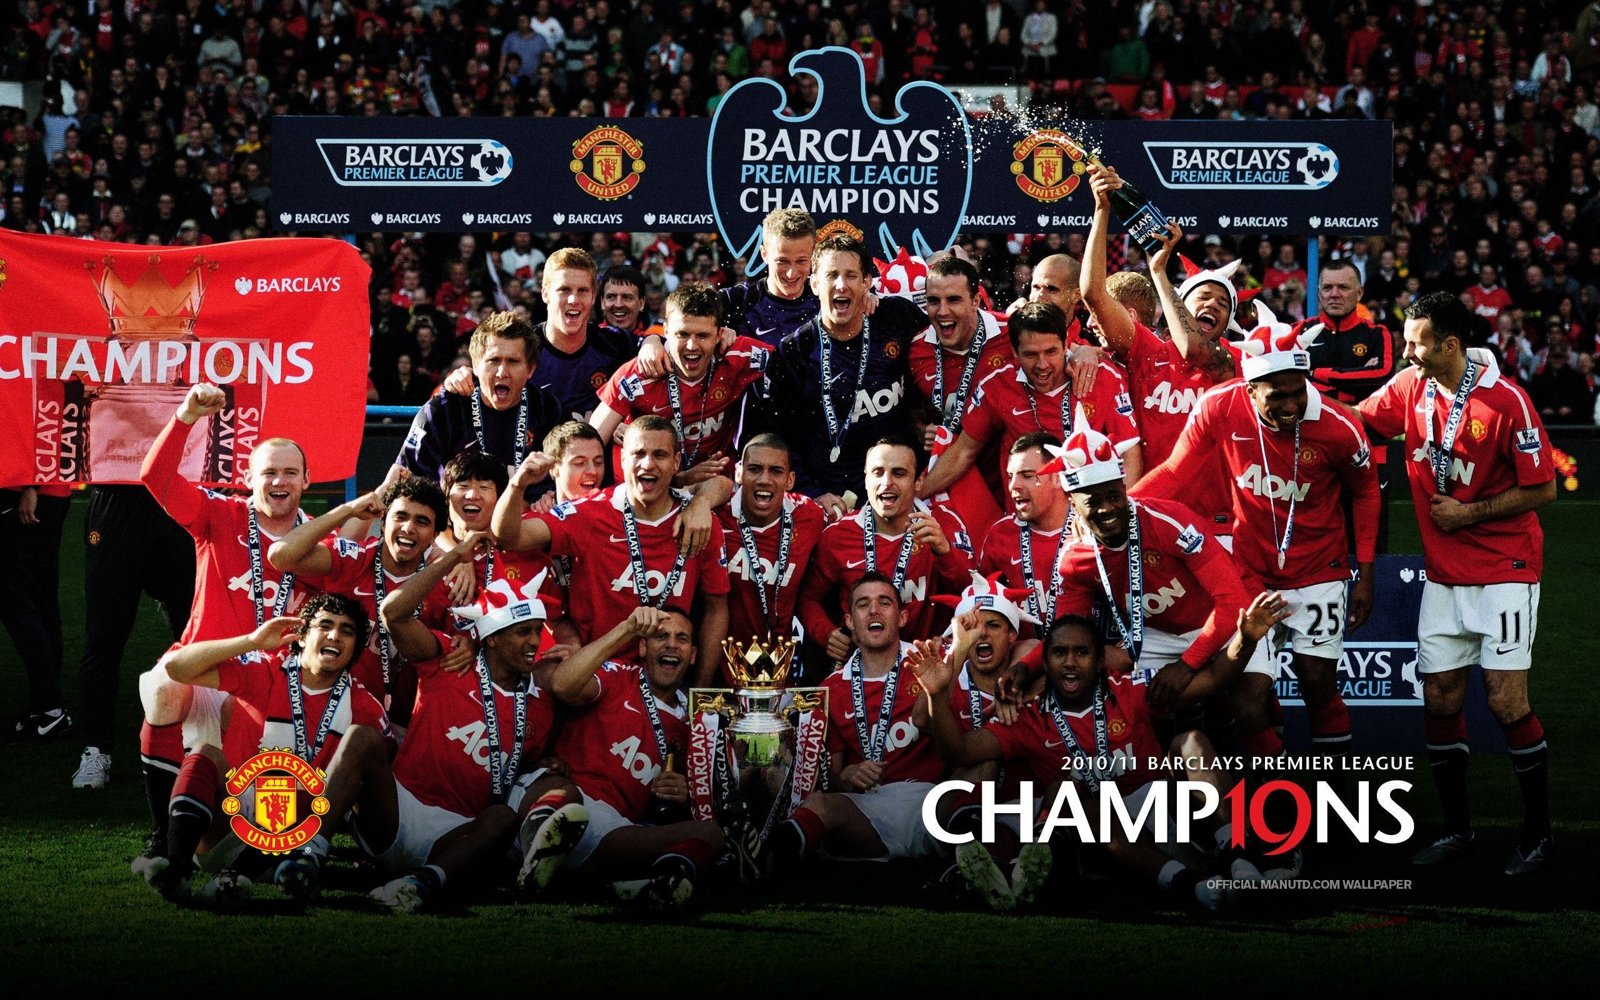 hinh nen manchester united 24 - wallpaper free download